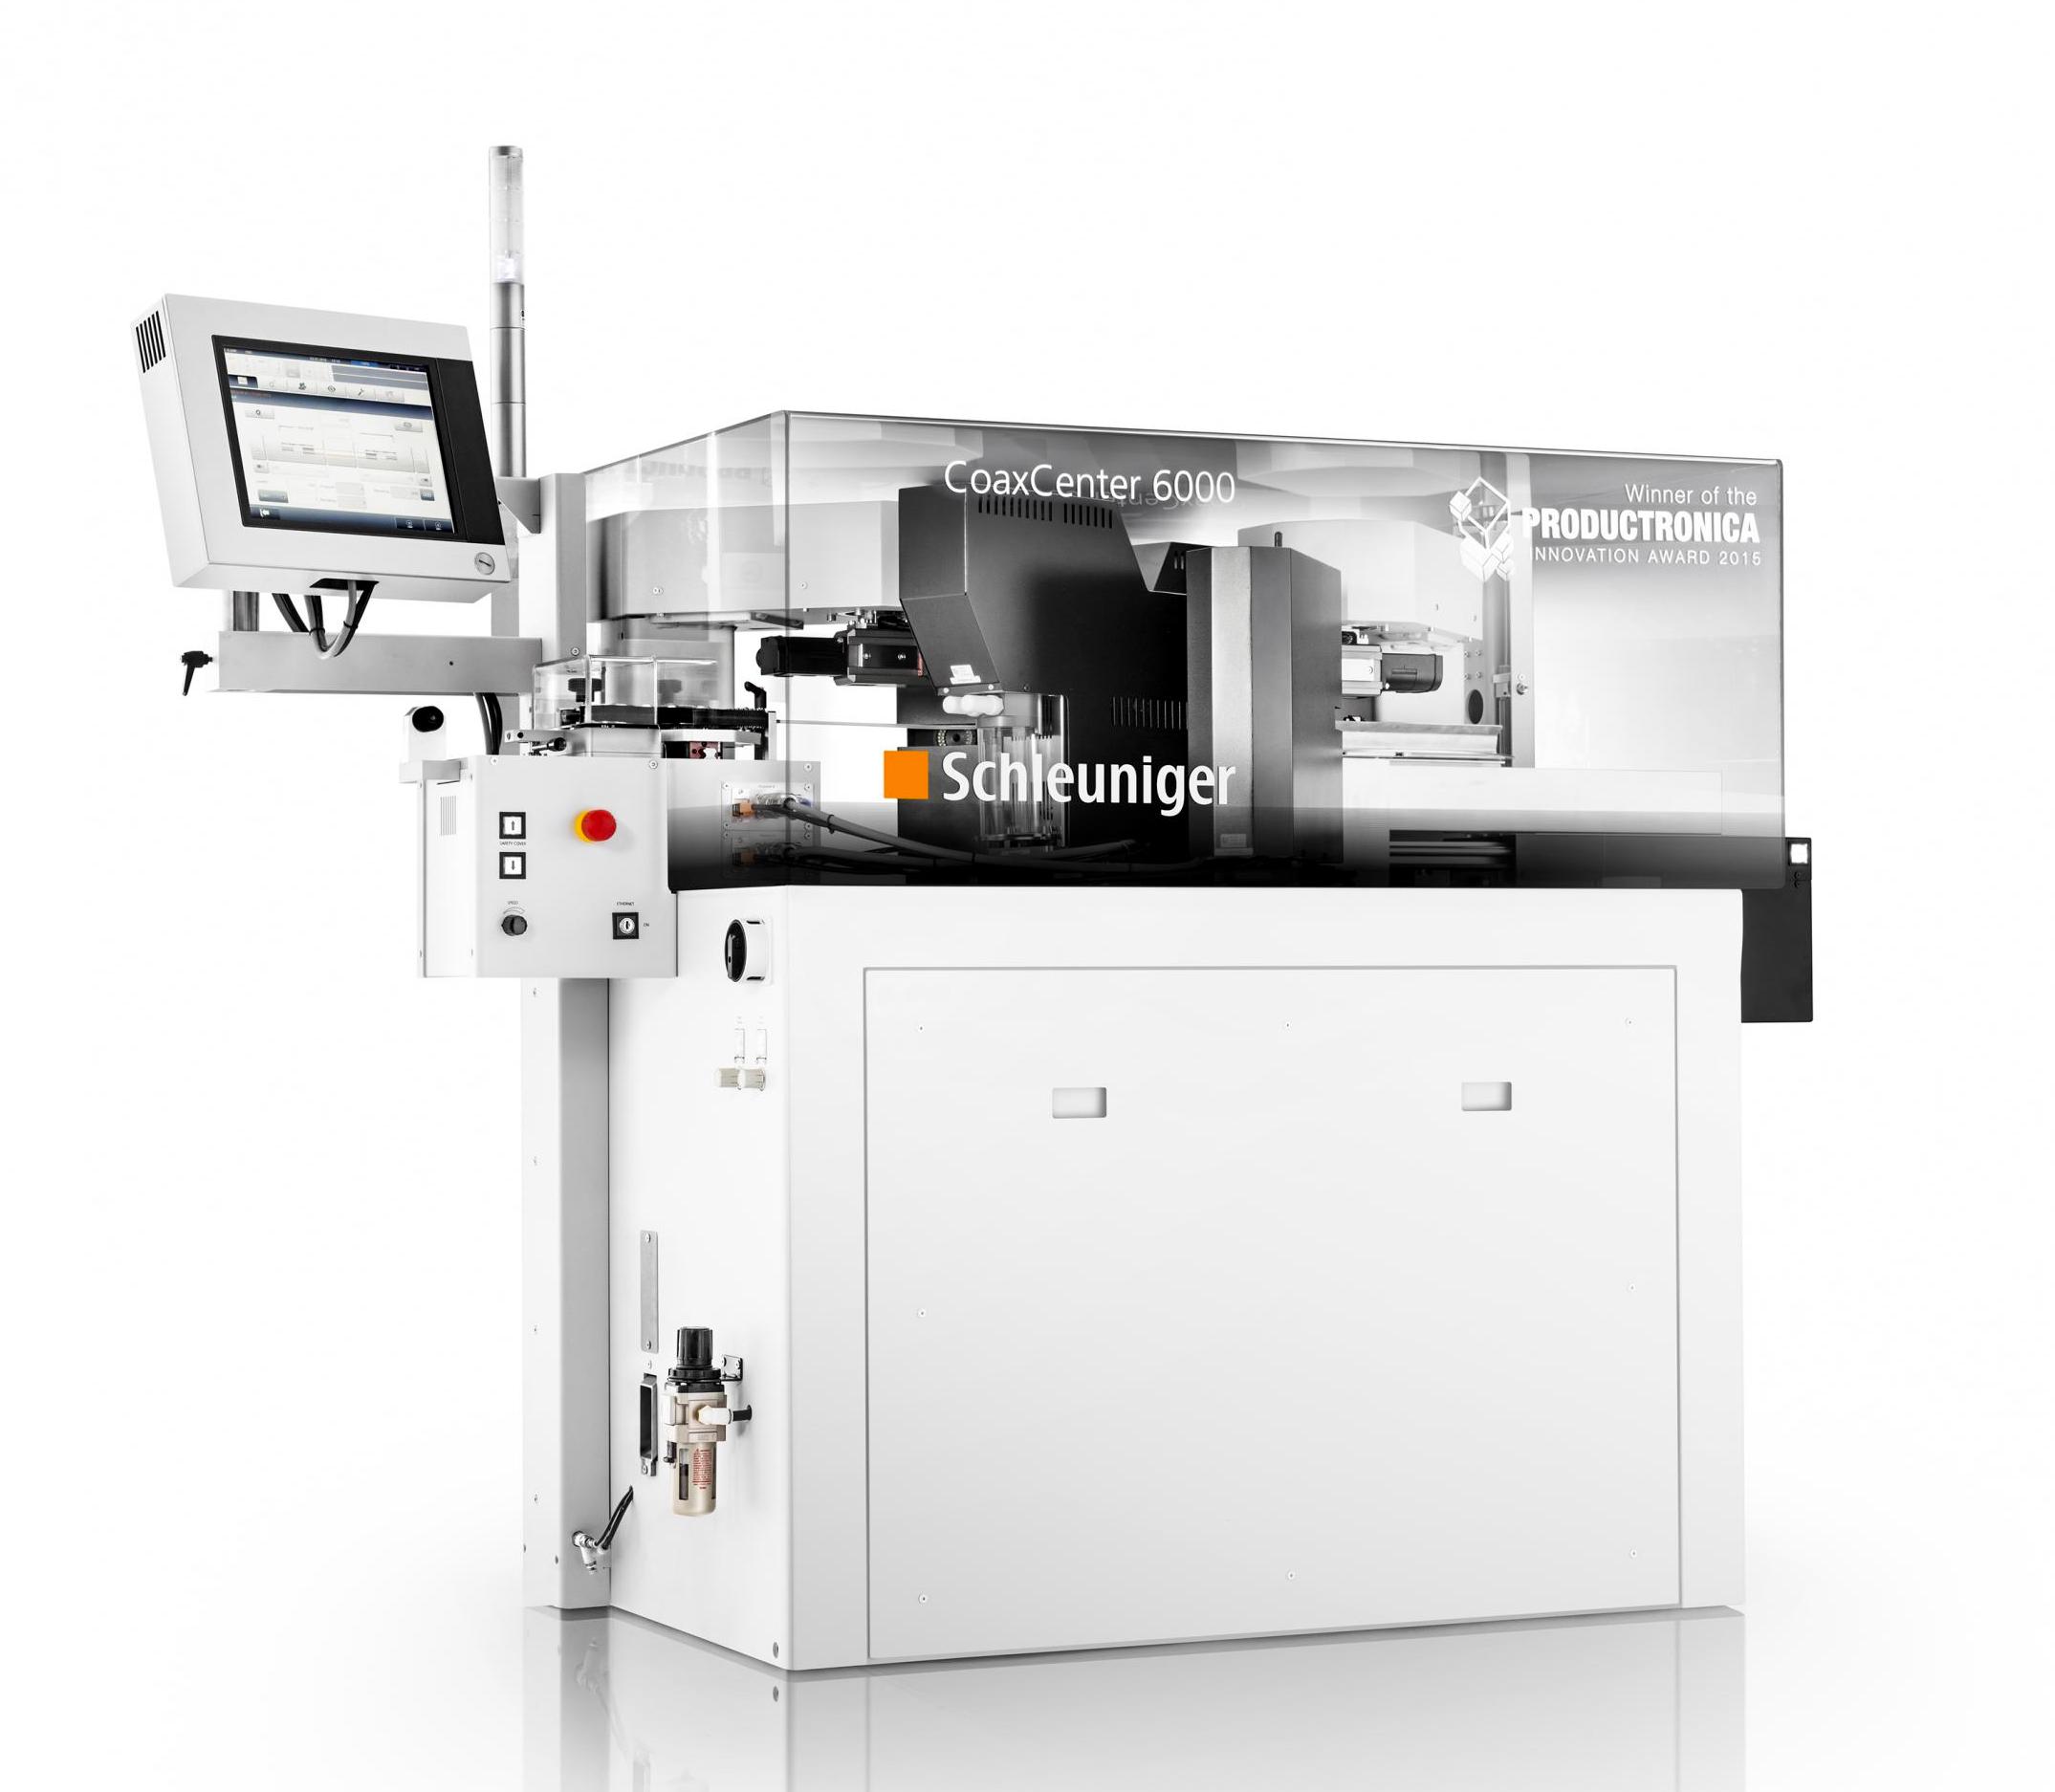 April 2019 Connector Industry News: Schleuniger to display CoaxCenter 6000 at 2019 Electrical Wire Processing Technology Expo